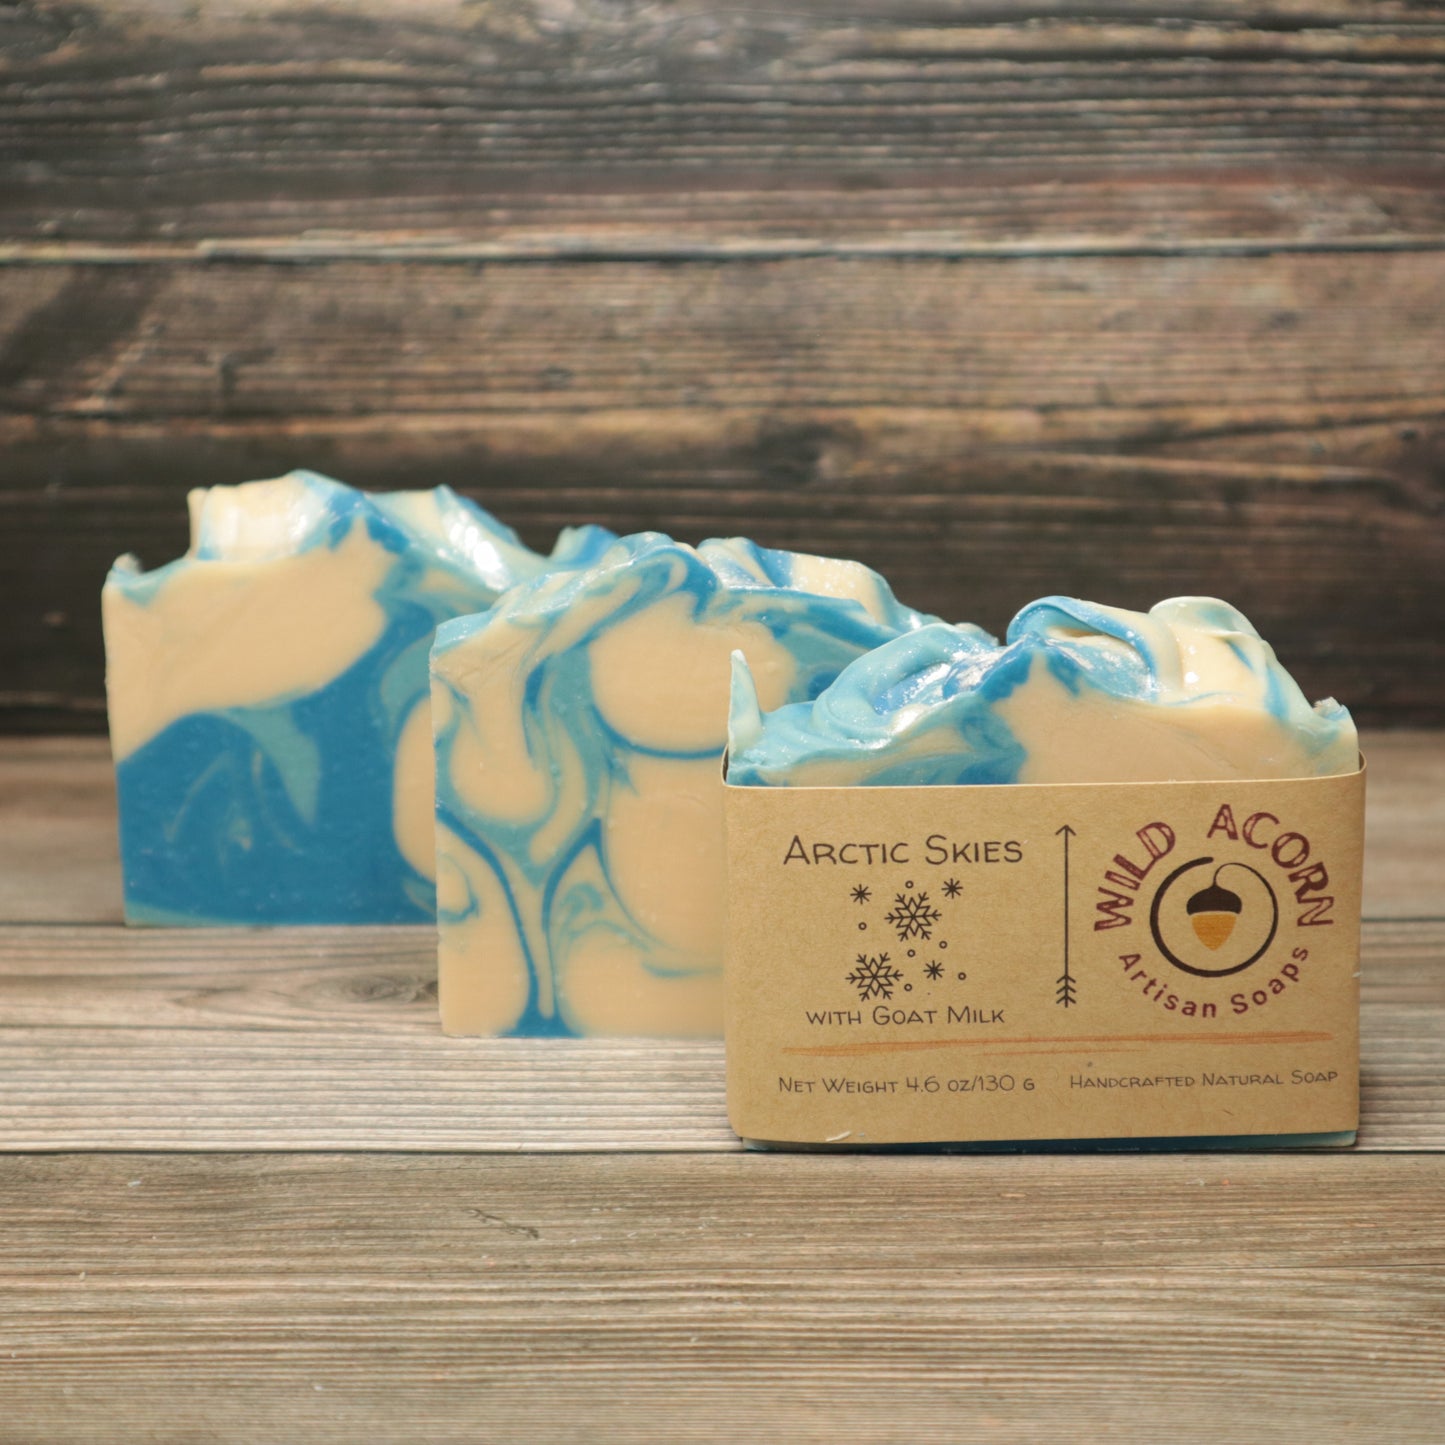 Three bars of soap with dark blue, light blue and white swirls. One bar has a tan label on it with a picture of snowflakes on it.